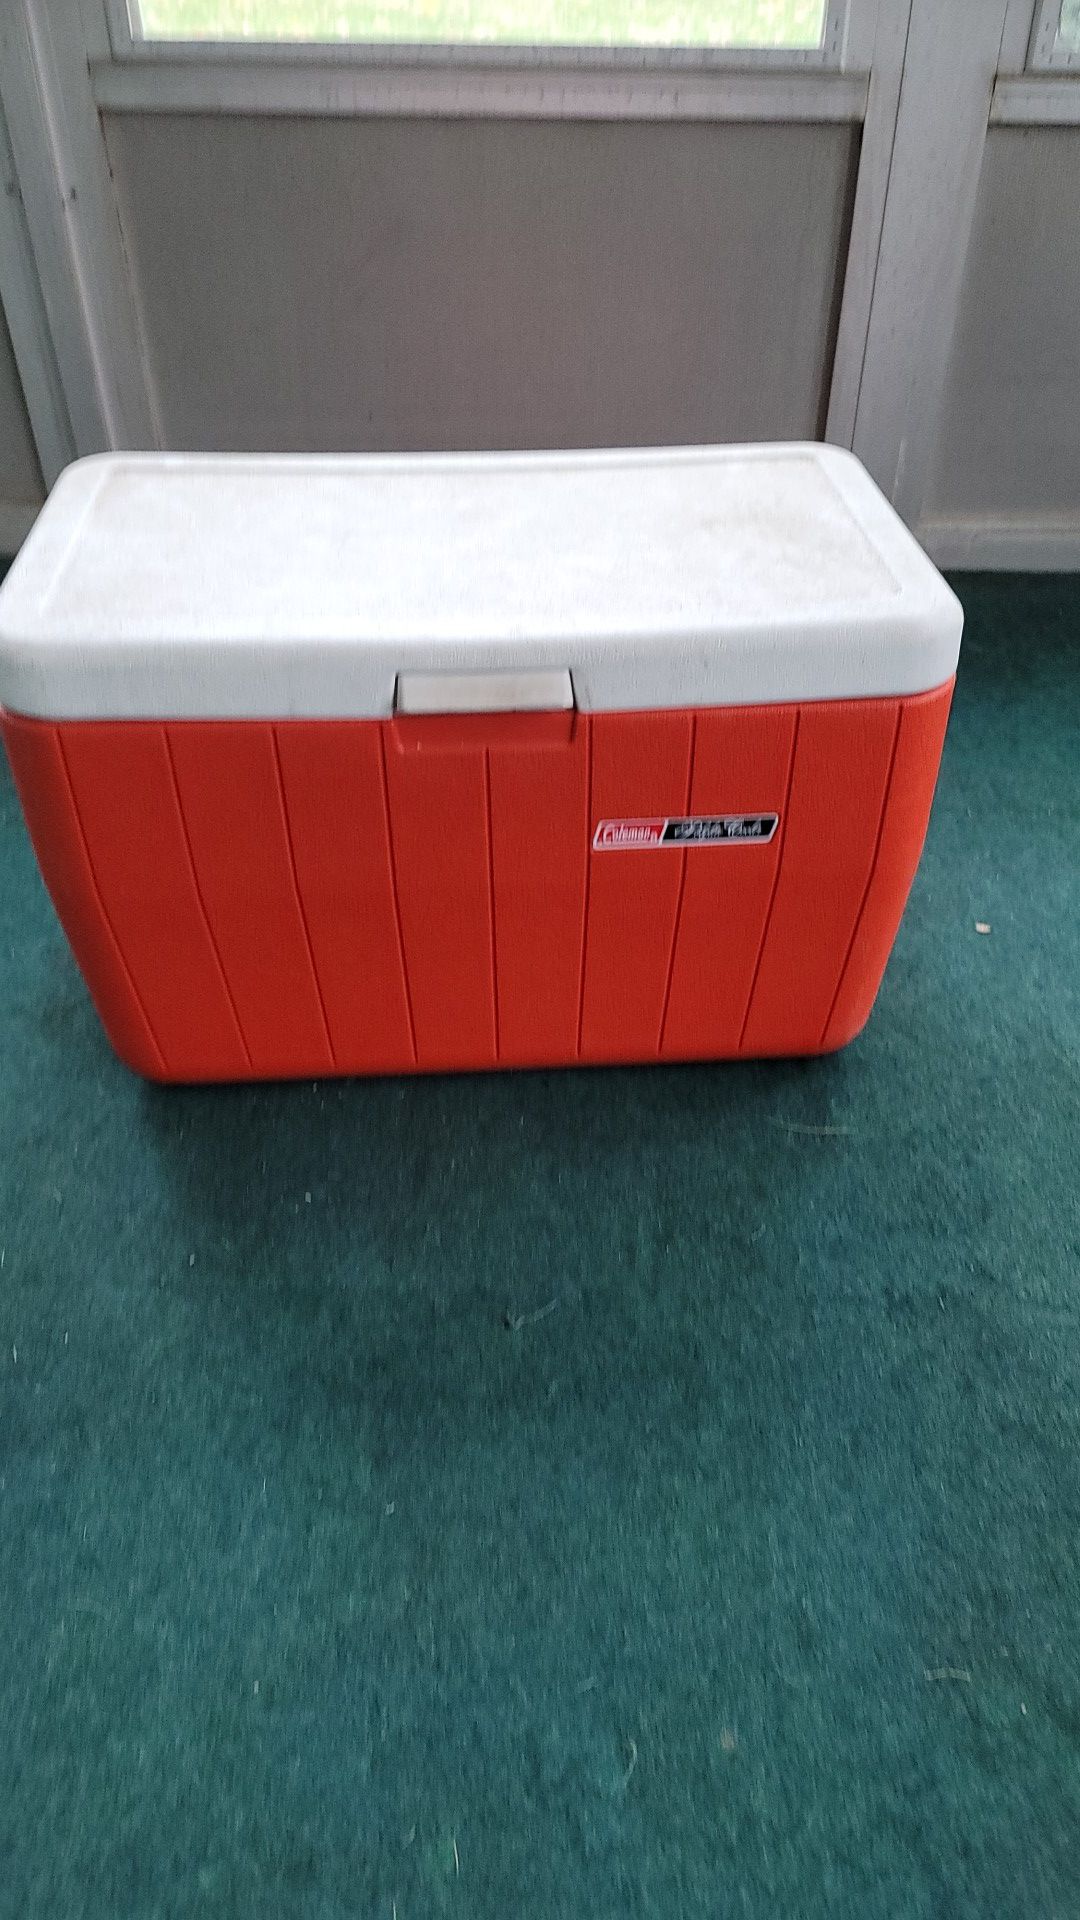 Coleman polylite cooler - located in Commack free